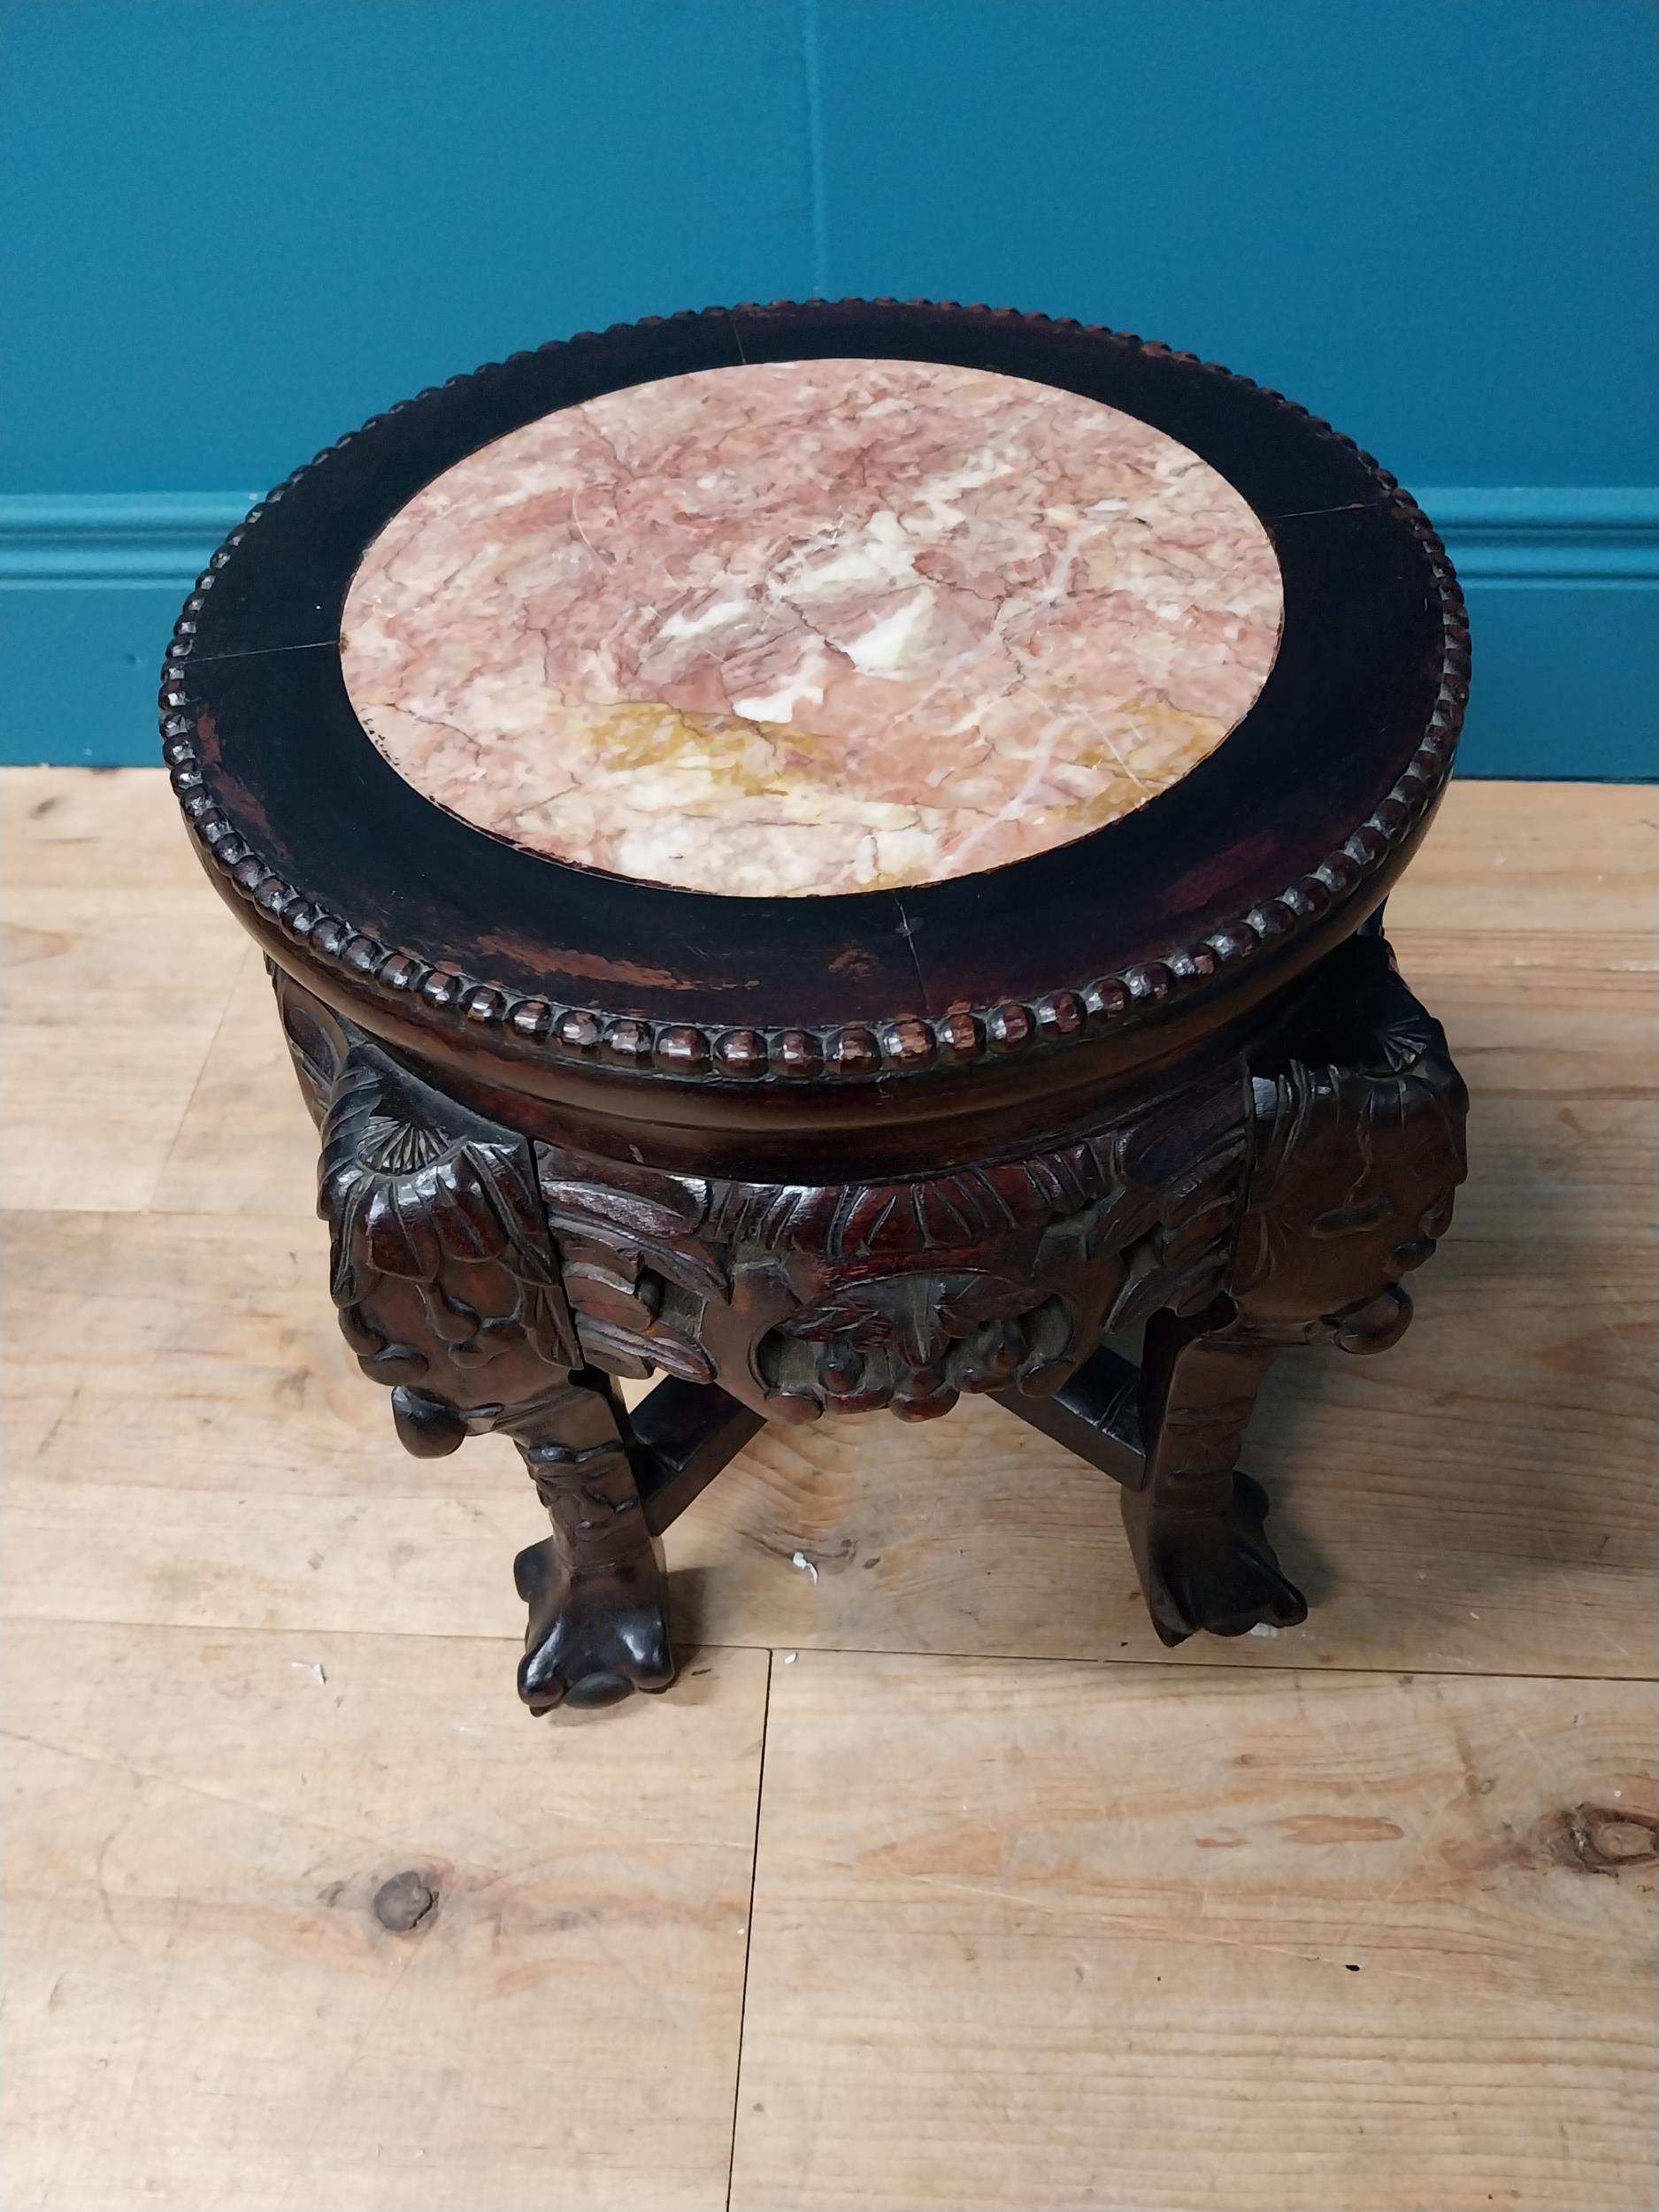 Carved hardwood jardiniere stand with inset marble top in the Chinese style. {34 cm H x 30 cm Diam} - Image 2 of 5